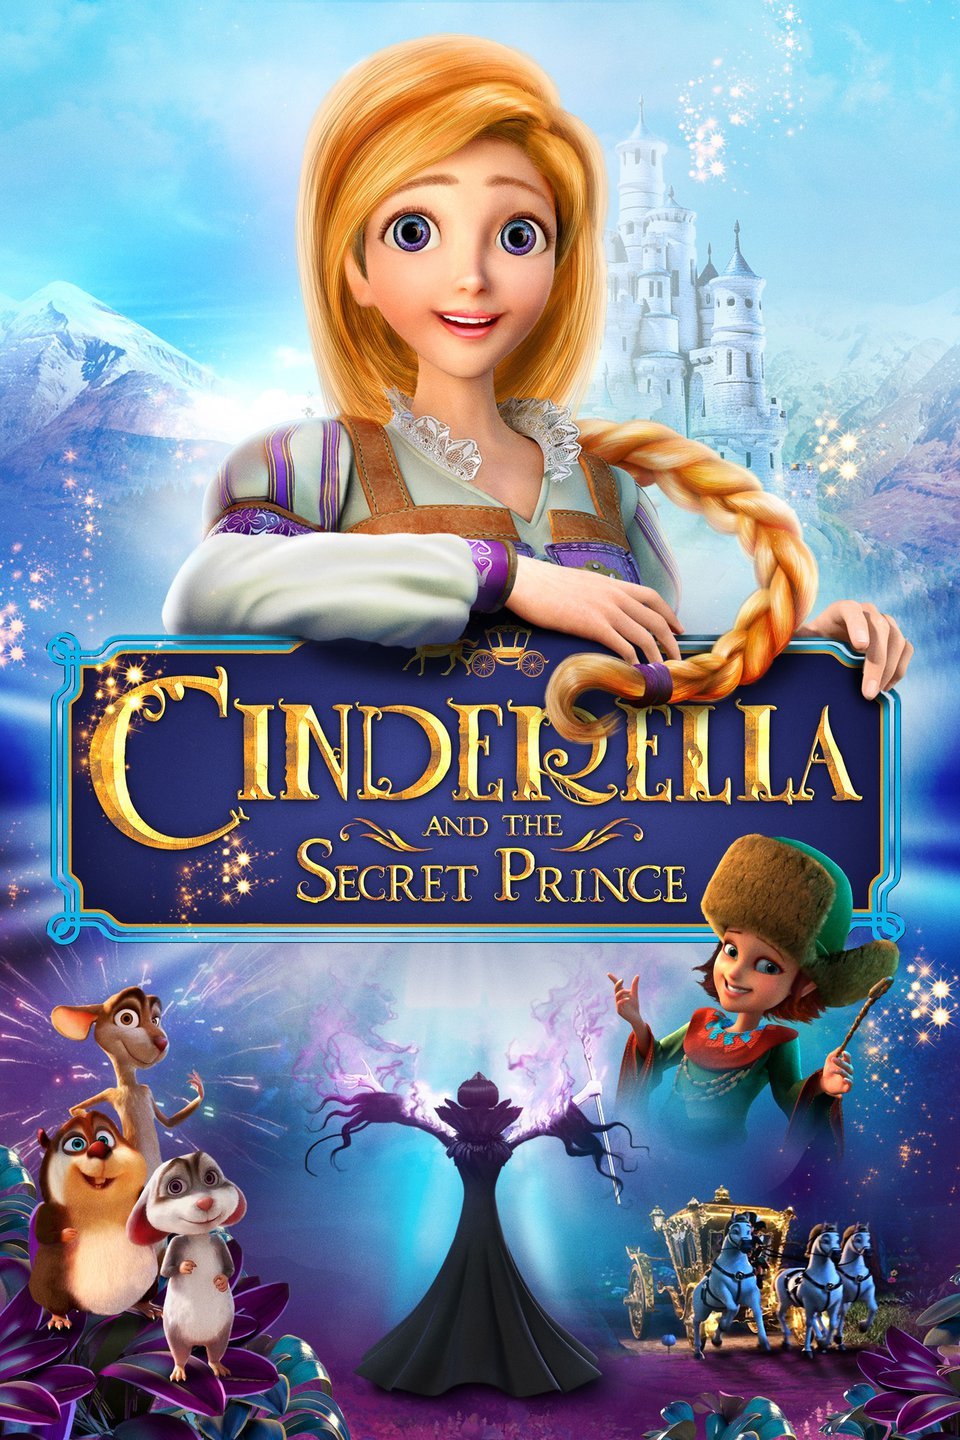 Cinderella and the Secret Prince - Rotten Tomatoes